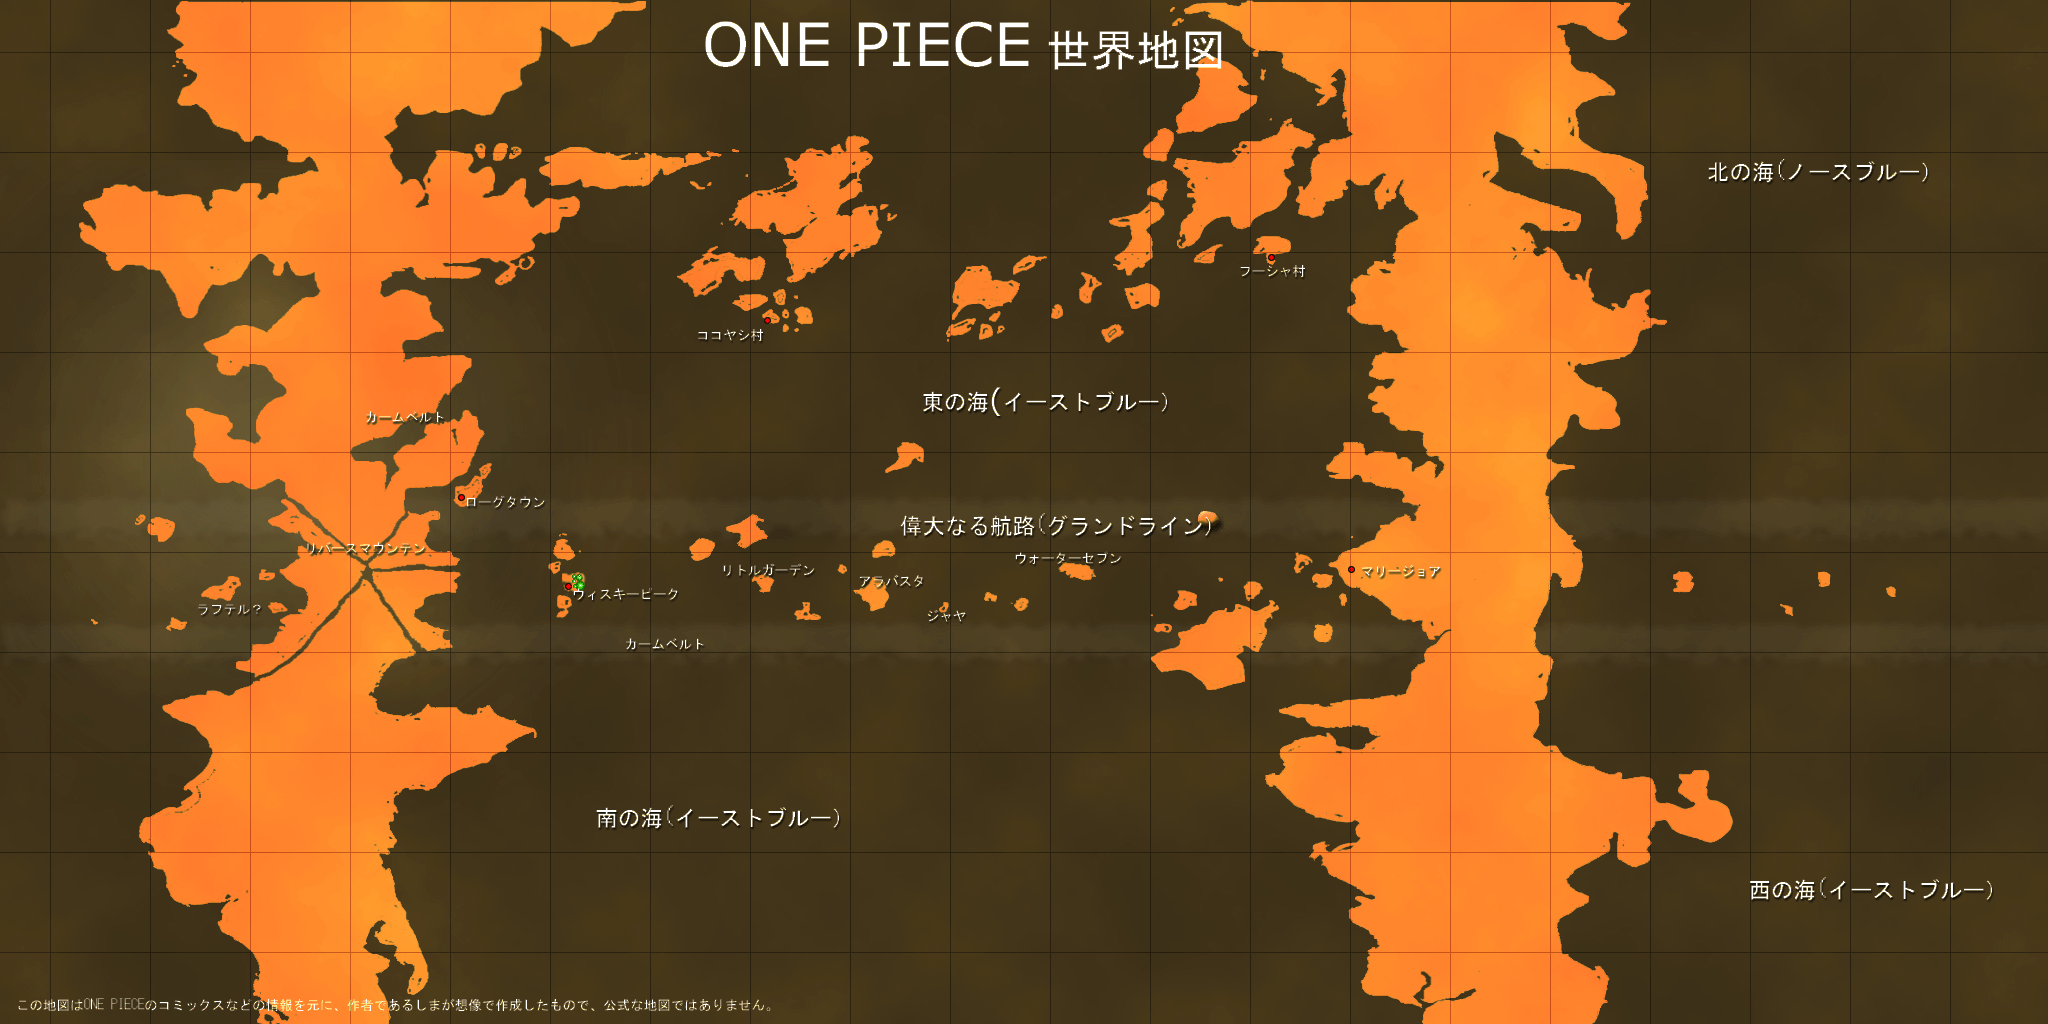 ONE PIECE Fanpage - MAP TO THE GRANDLINE!!!!^_^